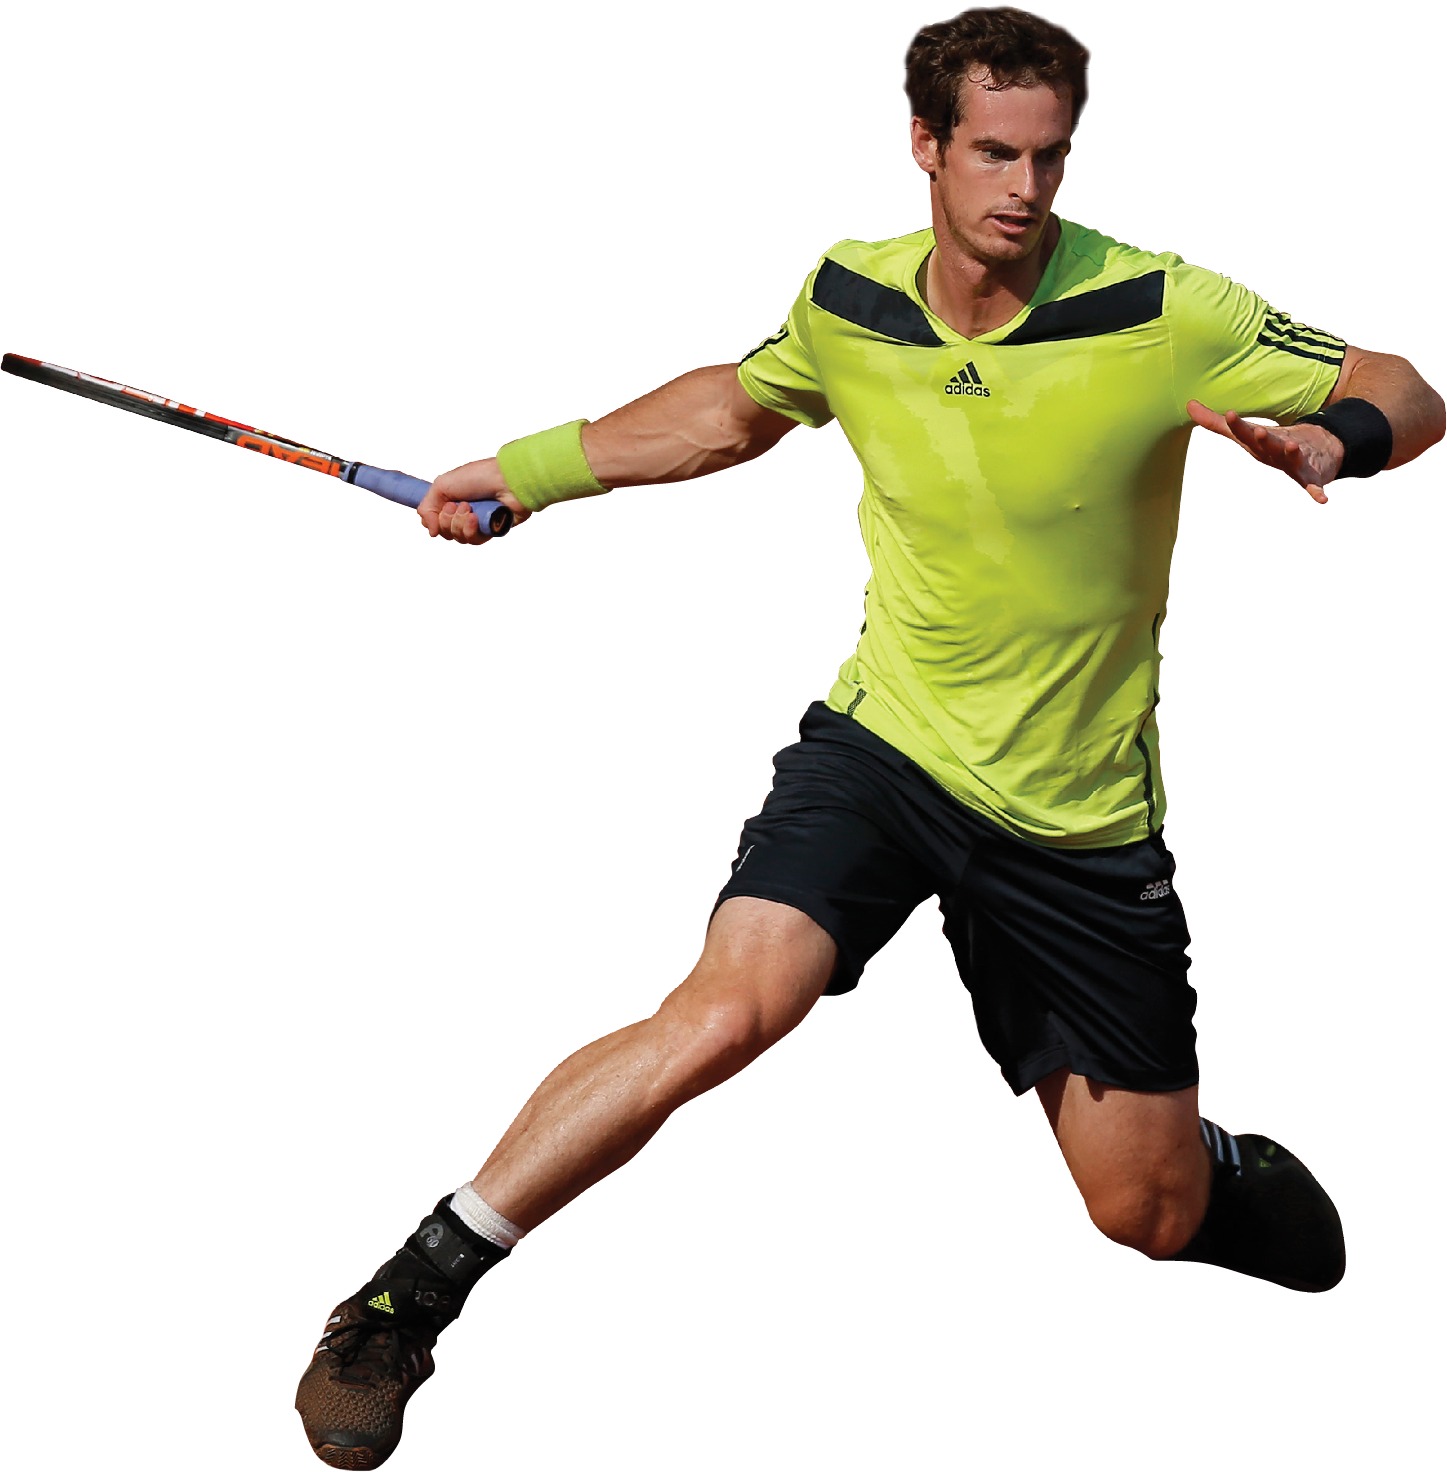 Pic Andy Murray Free Download Image PNG Image